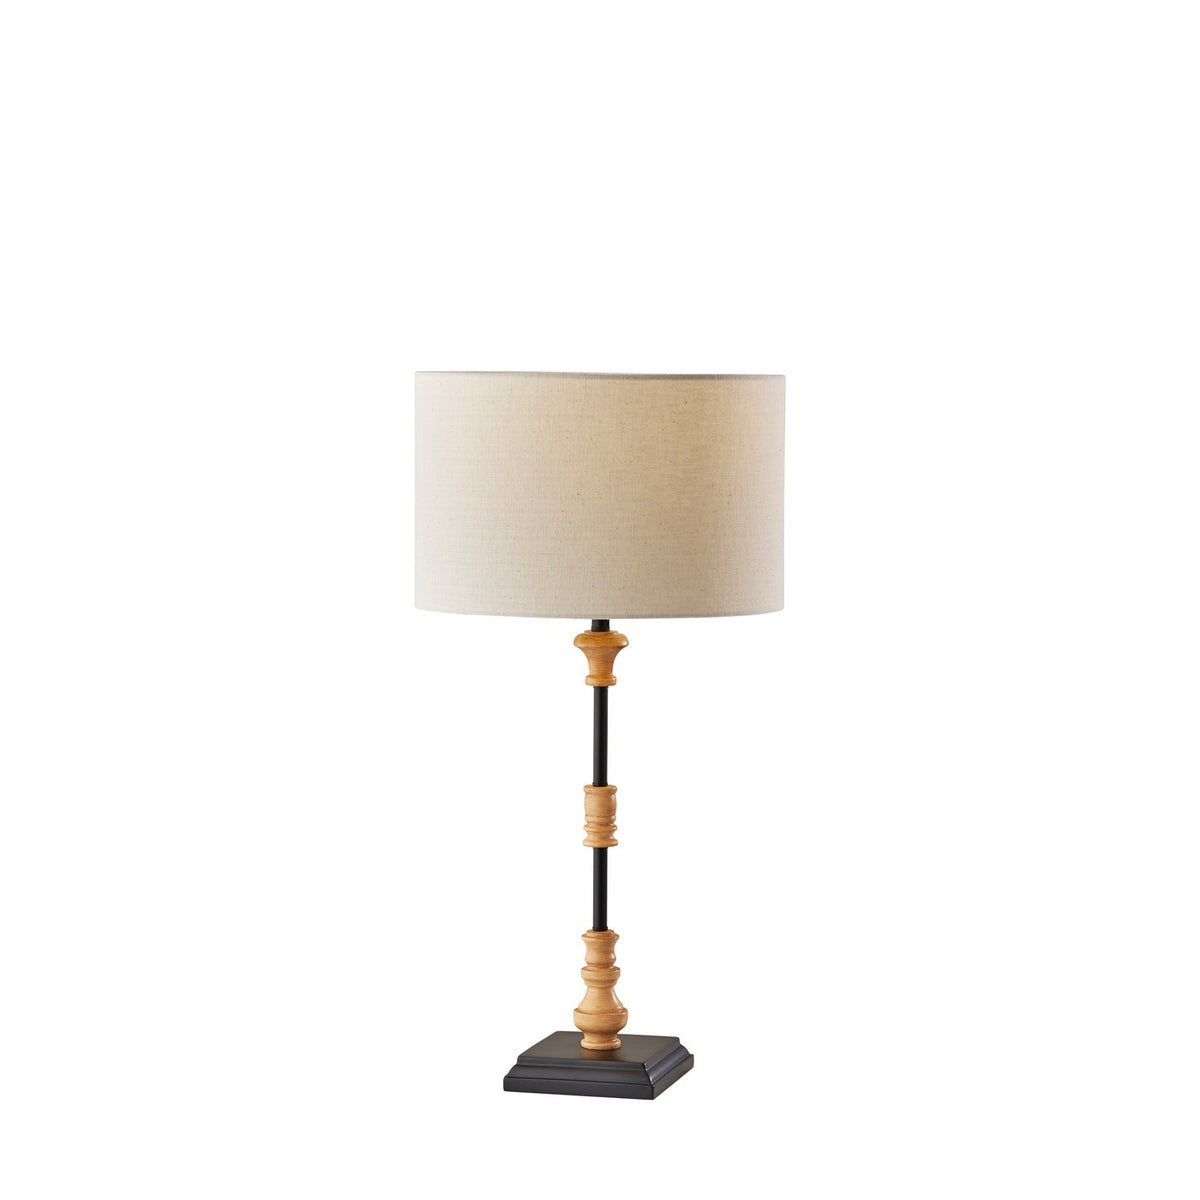 Adesso Home - 3503-12 - Table Lamp - Fremont - Black W. Natural Wood Finished Resin Accents